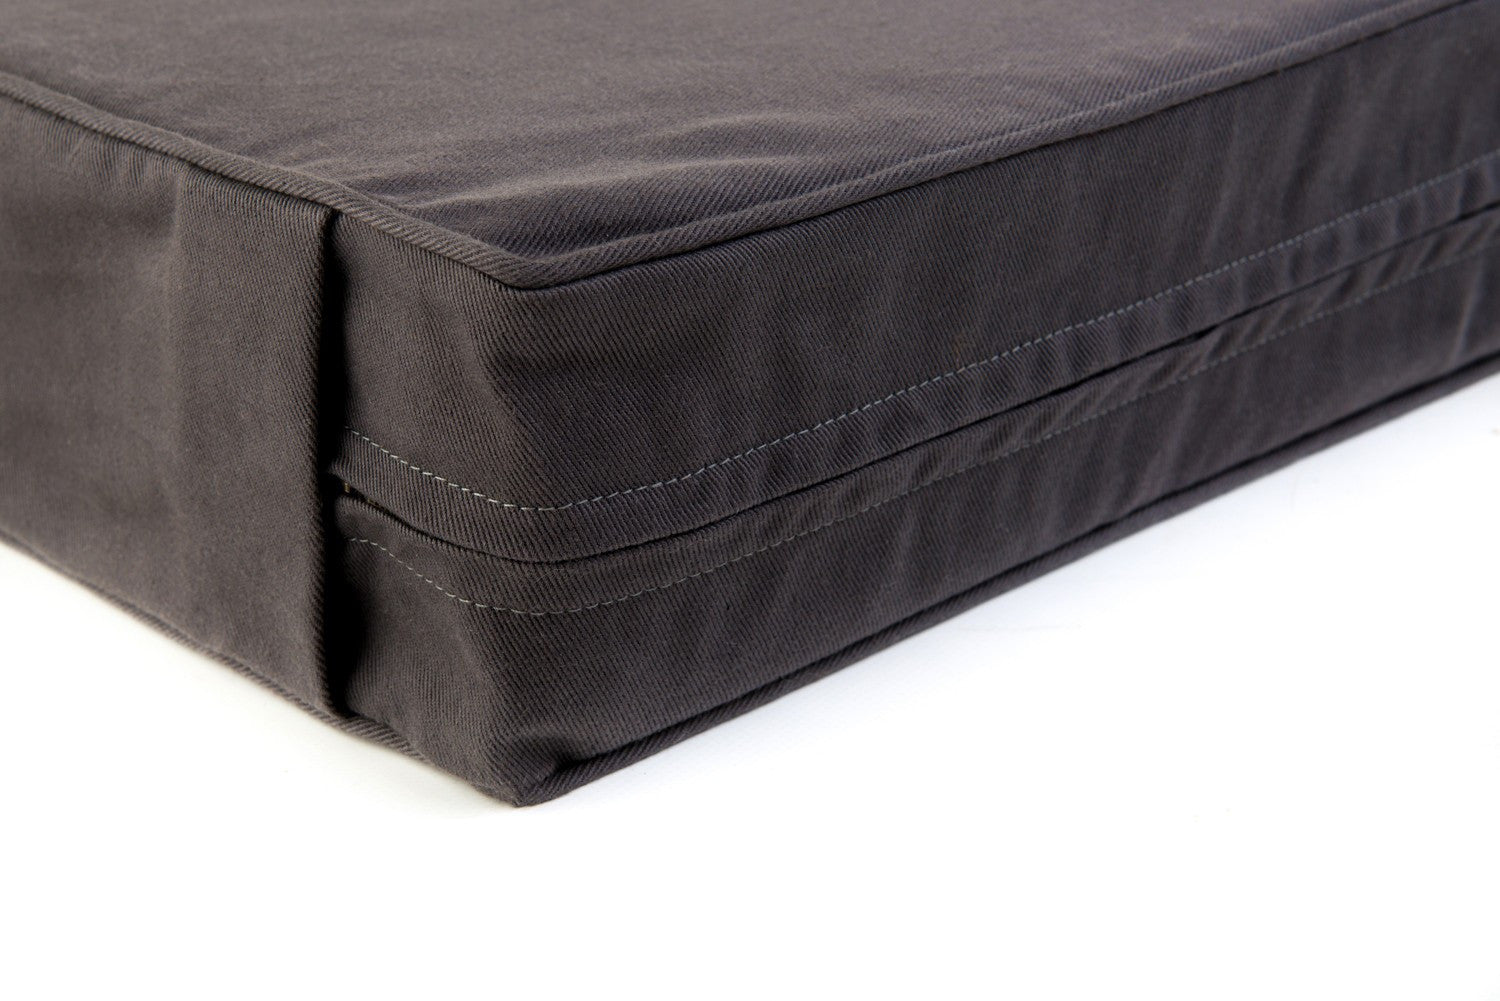 Corner of Hixx Classic charcoal bull denim cotton luxury bed for dogs. Made in Britain from organic materials.